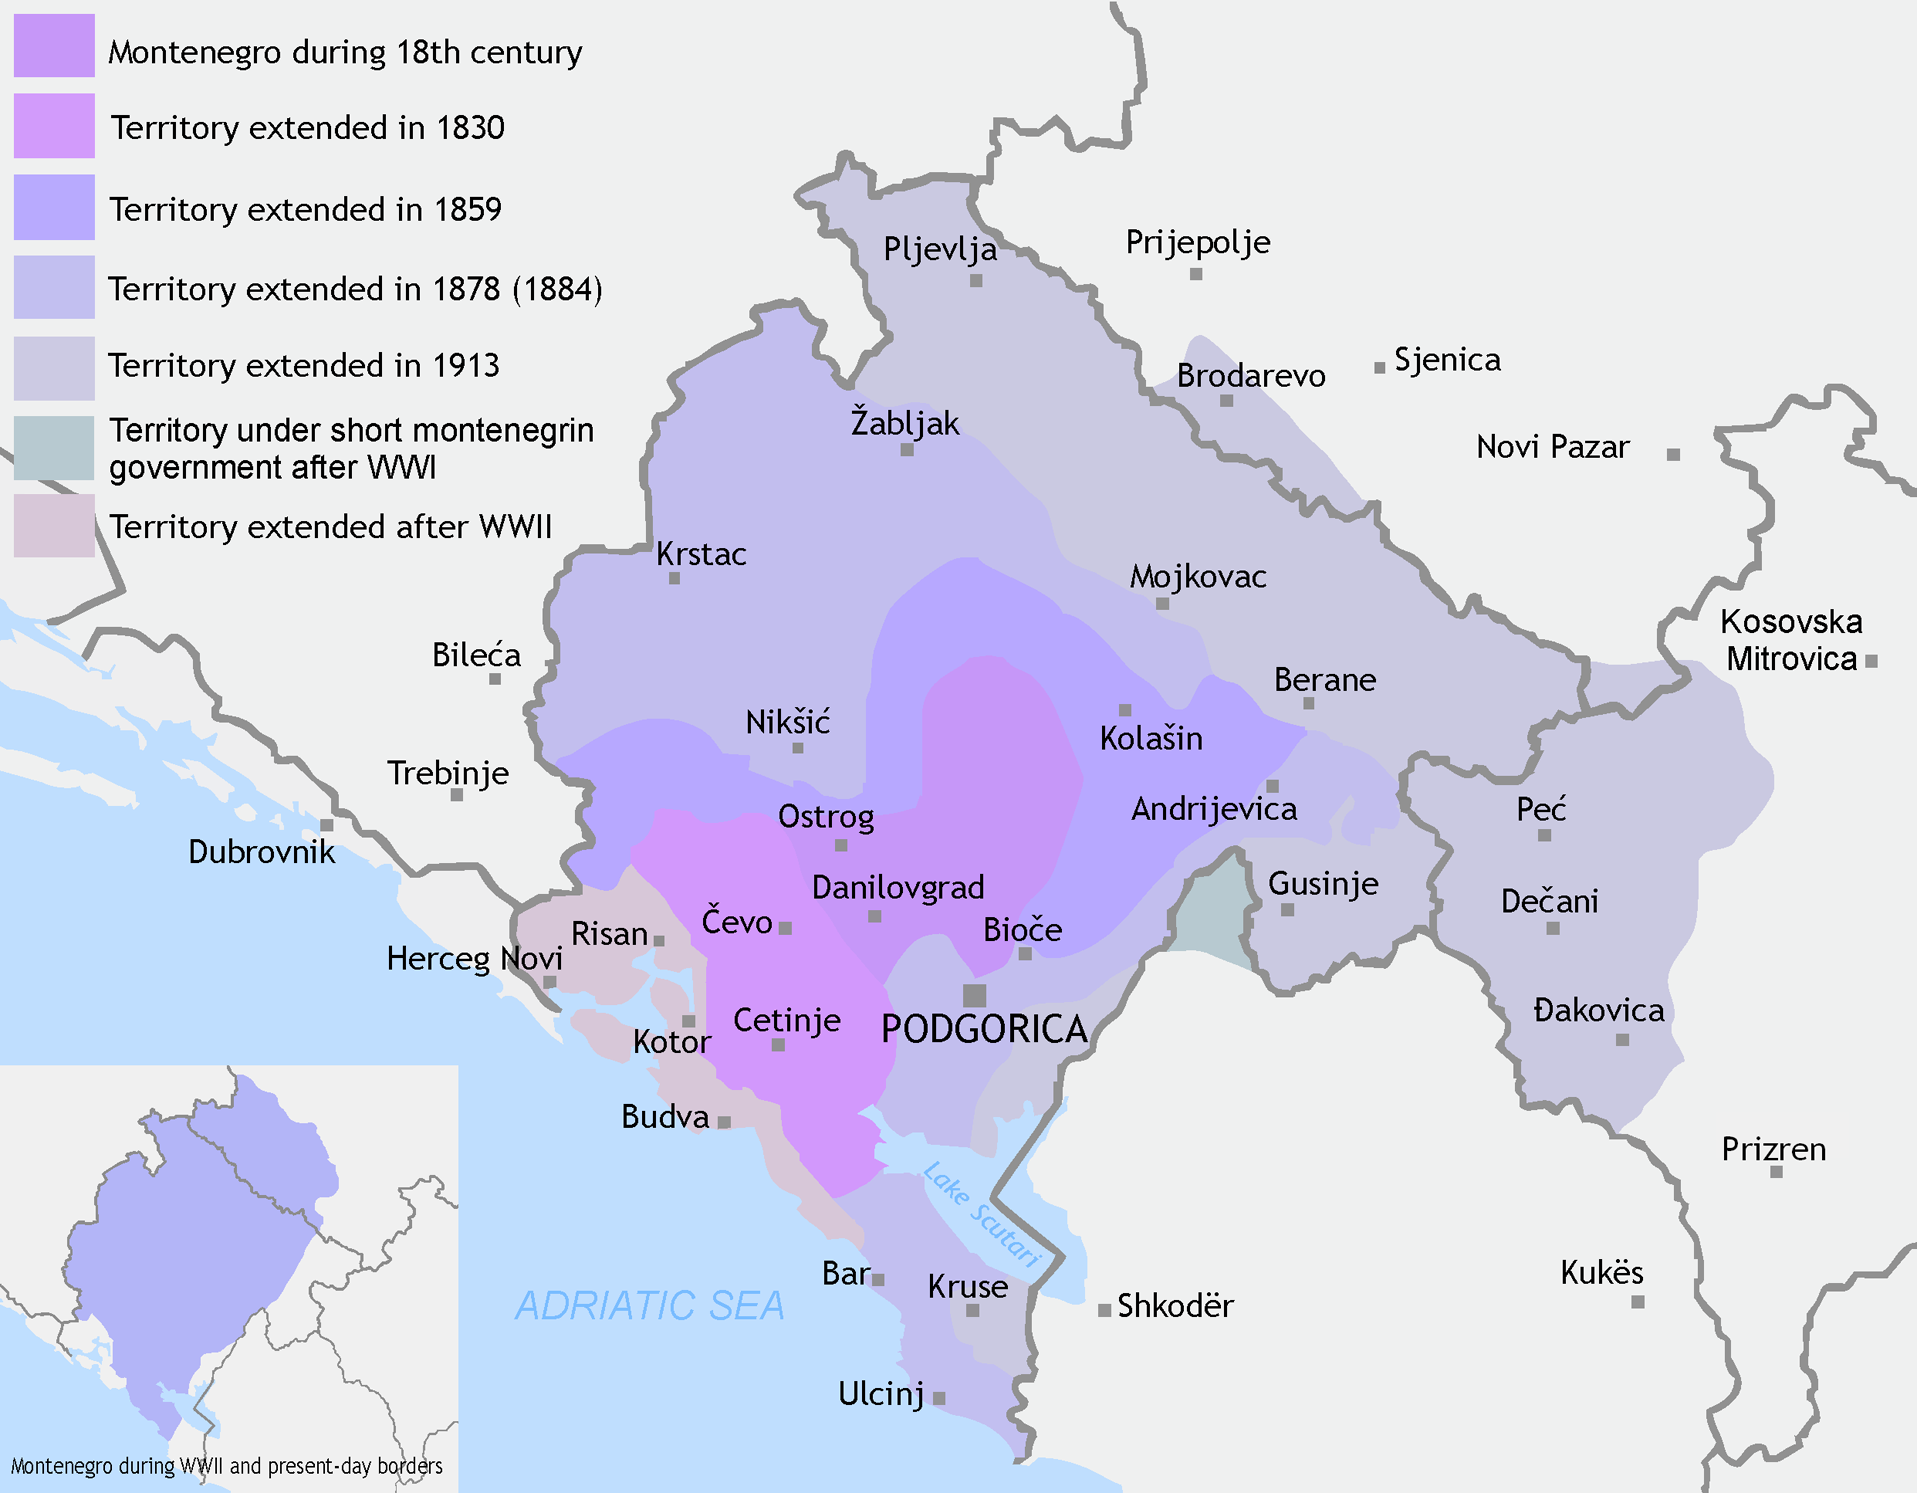 montenegro_territory_expanded_1830-1944.png